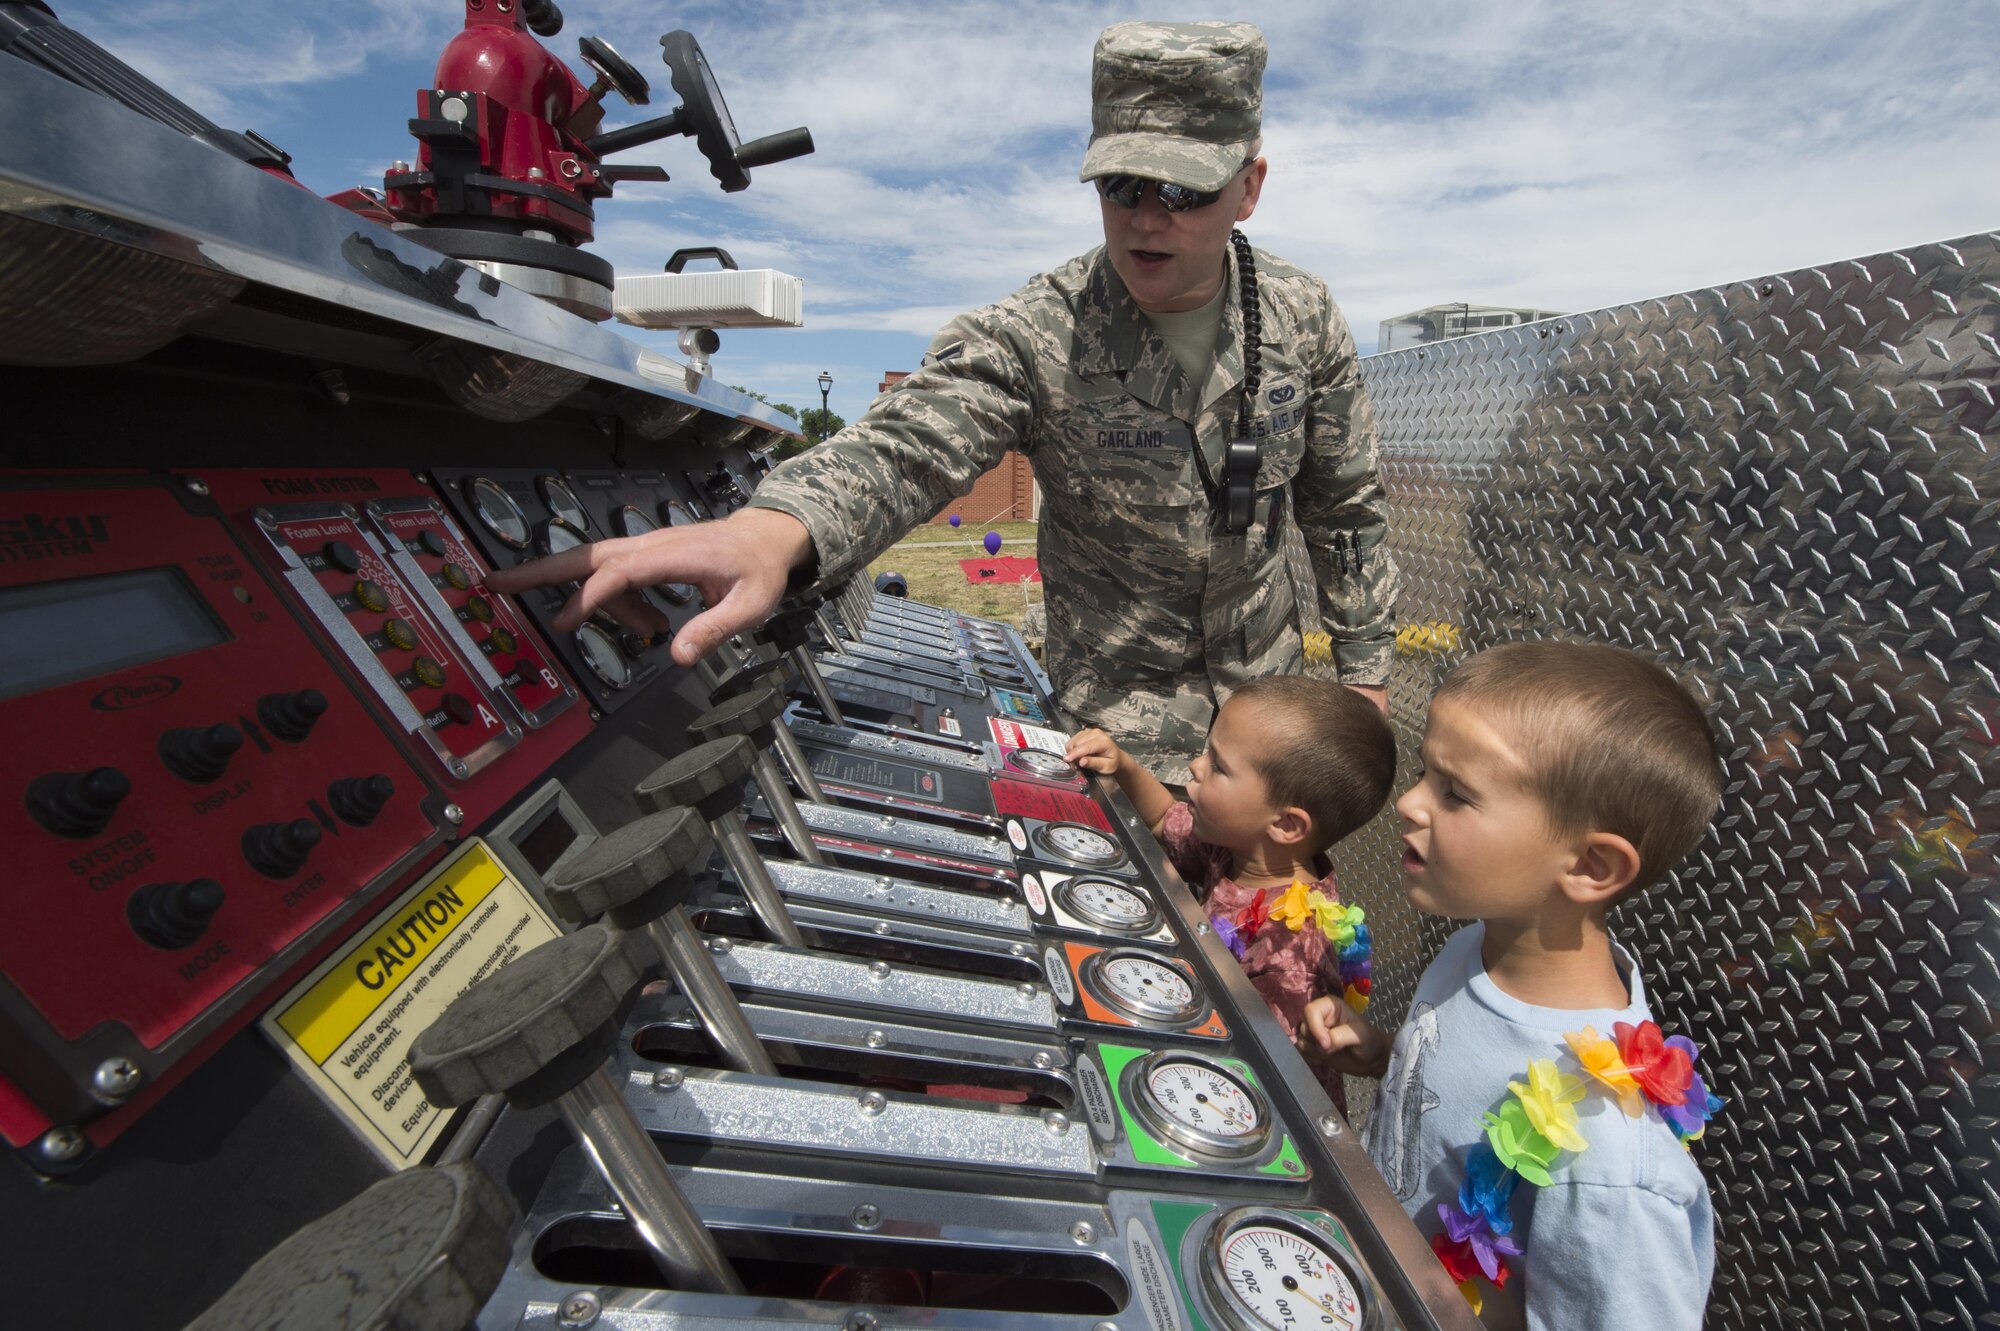 Airman 1st Class Dustin Garland, 90th Civil Engineering Squadron firefighter, explains the water pressure controls of a fire truck to Finnegan and Oliver Fournier, sons of Cody Fournier, East High School English teacher, during the Joint Services Multicultural Event at F.E. Warren Air Force Base, Wyo., June 22, 2016. An activity area with activities and bounce houses was available for children to enjoy. (U.S. Air Force photo by Staff Sgt. Christopher Ruano)